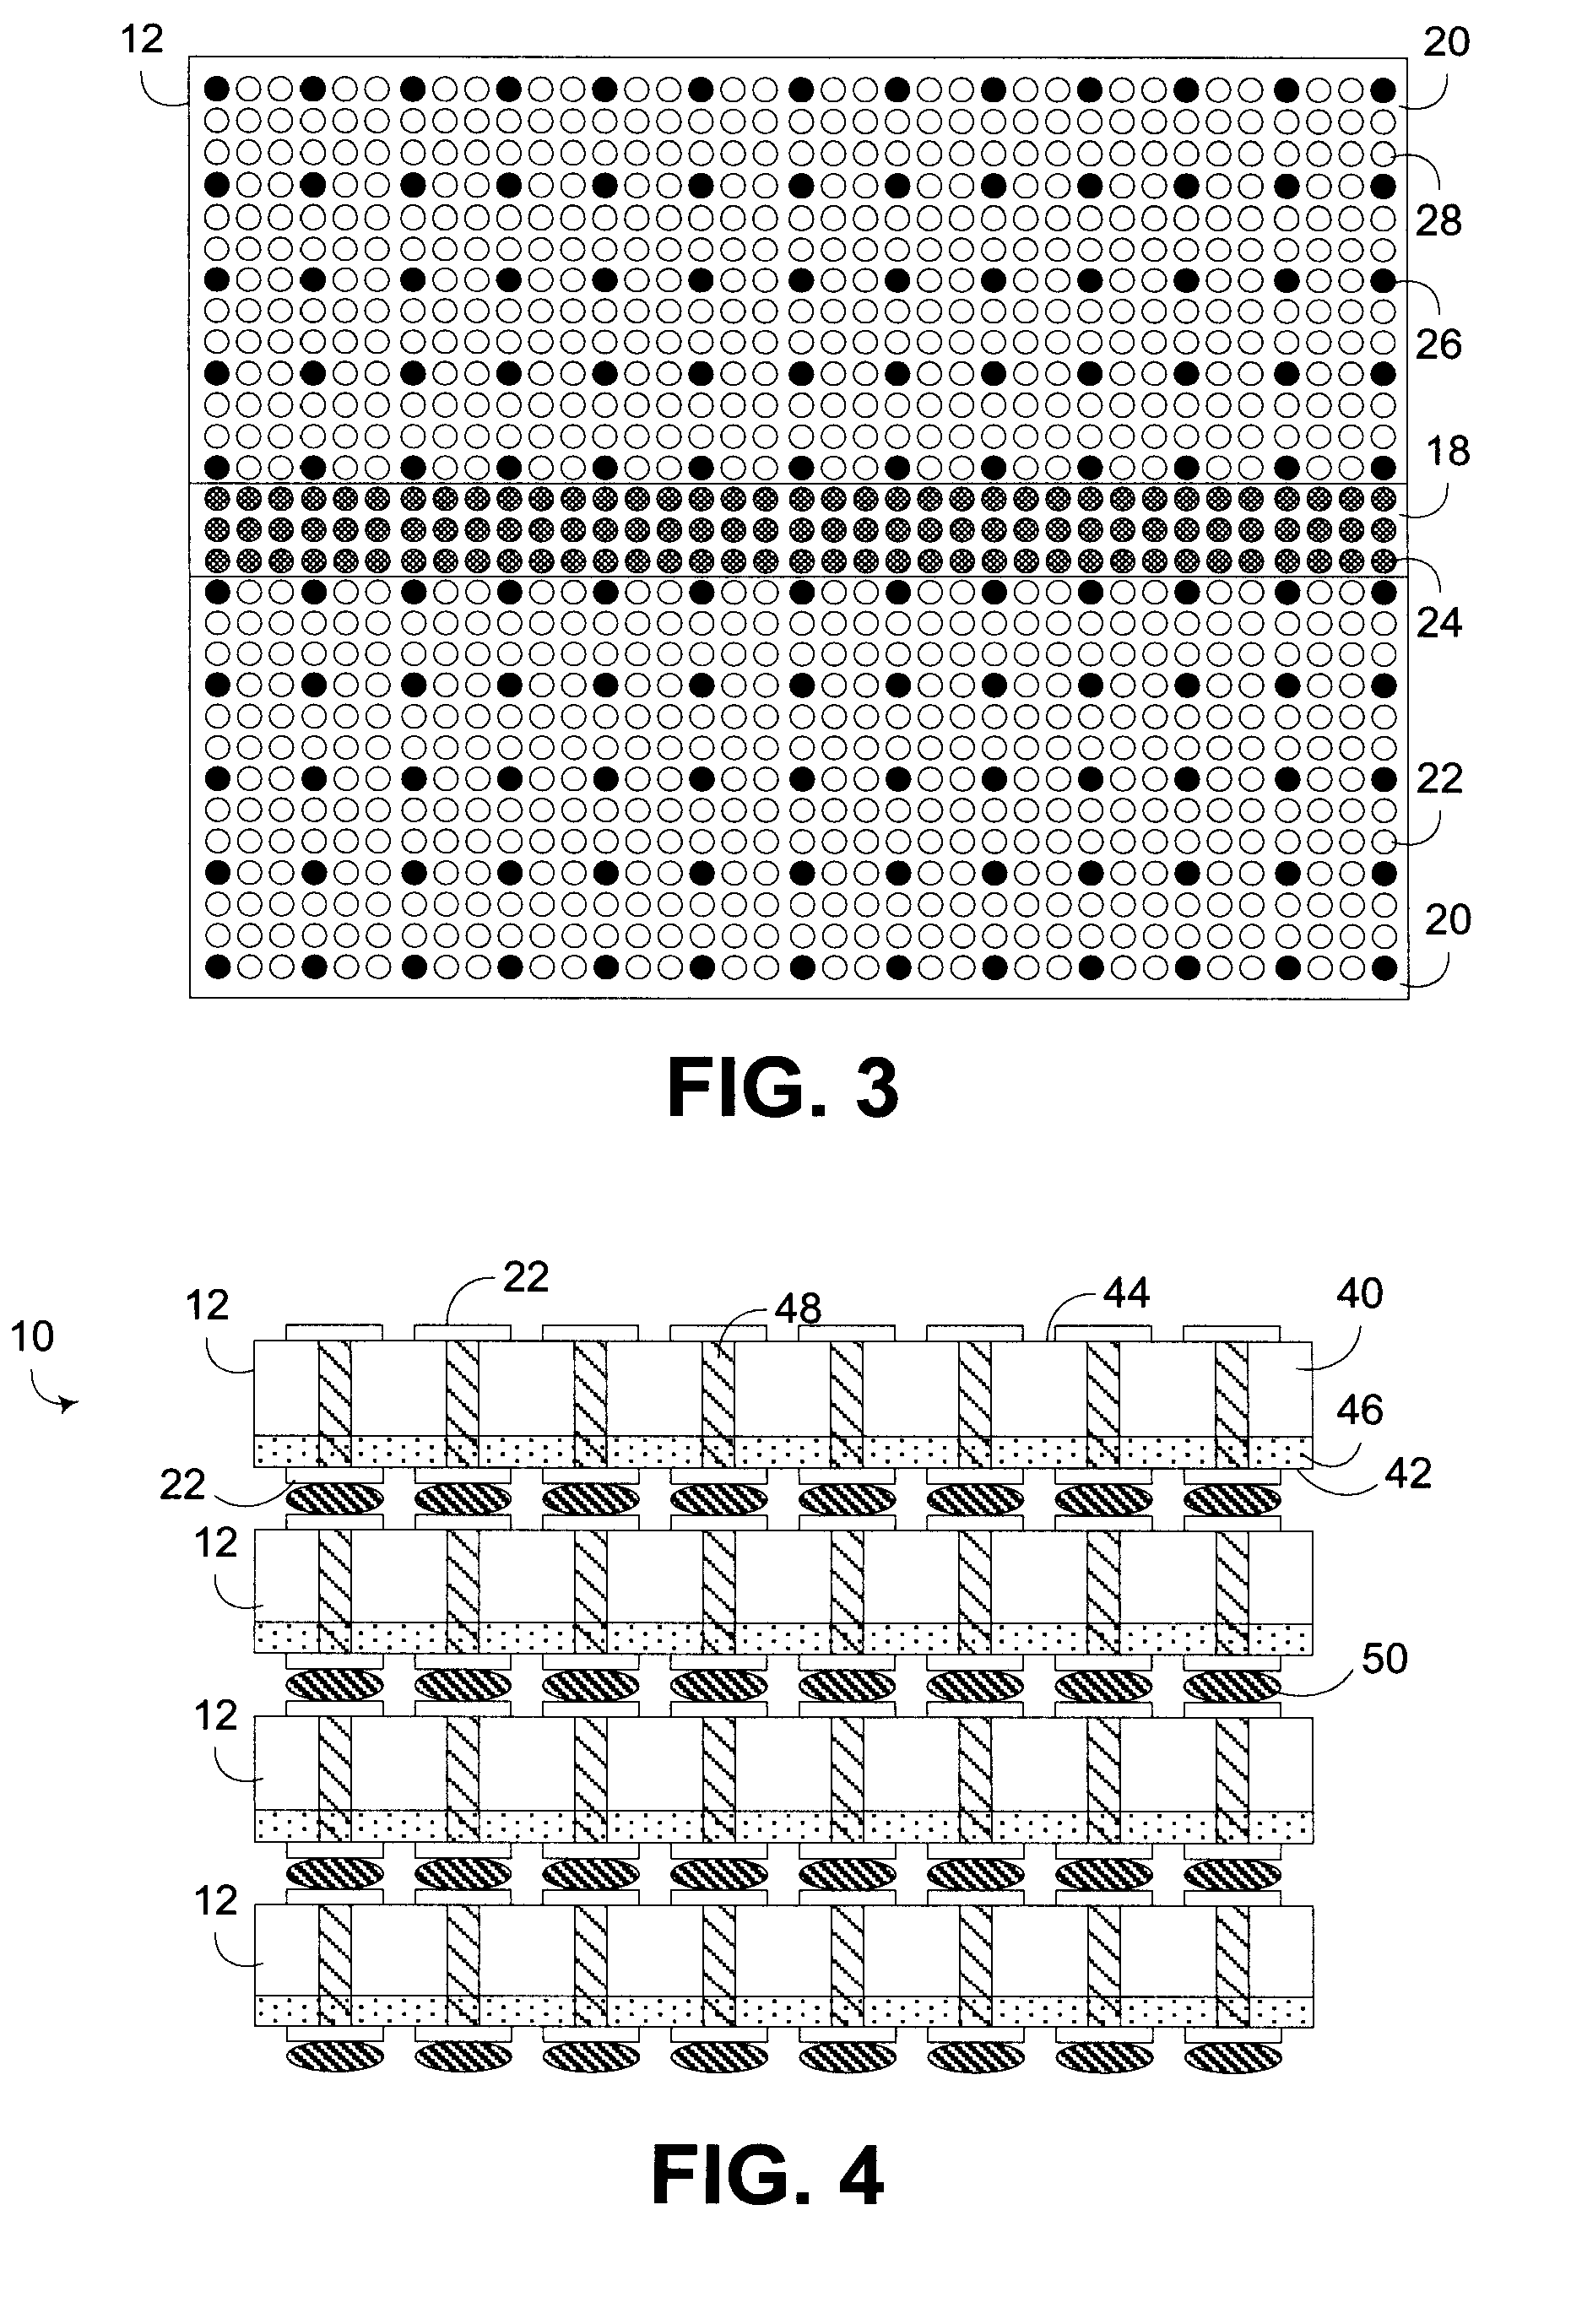 Universal Inter-Layer Interconnect for Multi-Layer Semiconductor Stacks